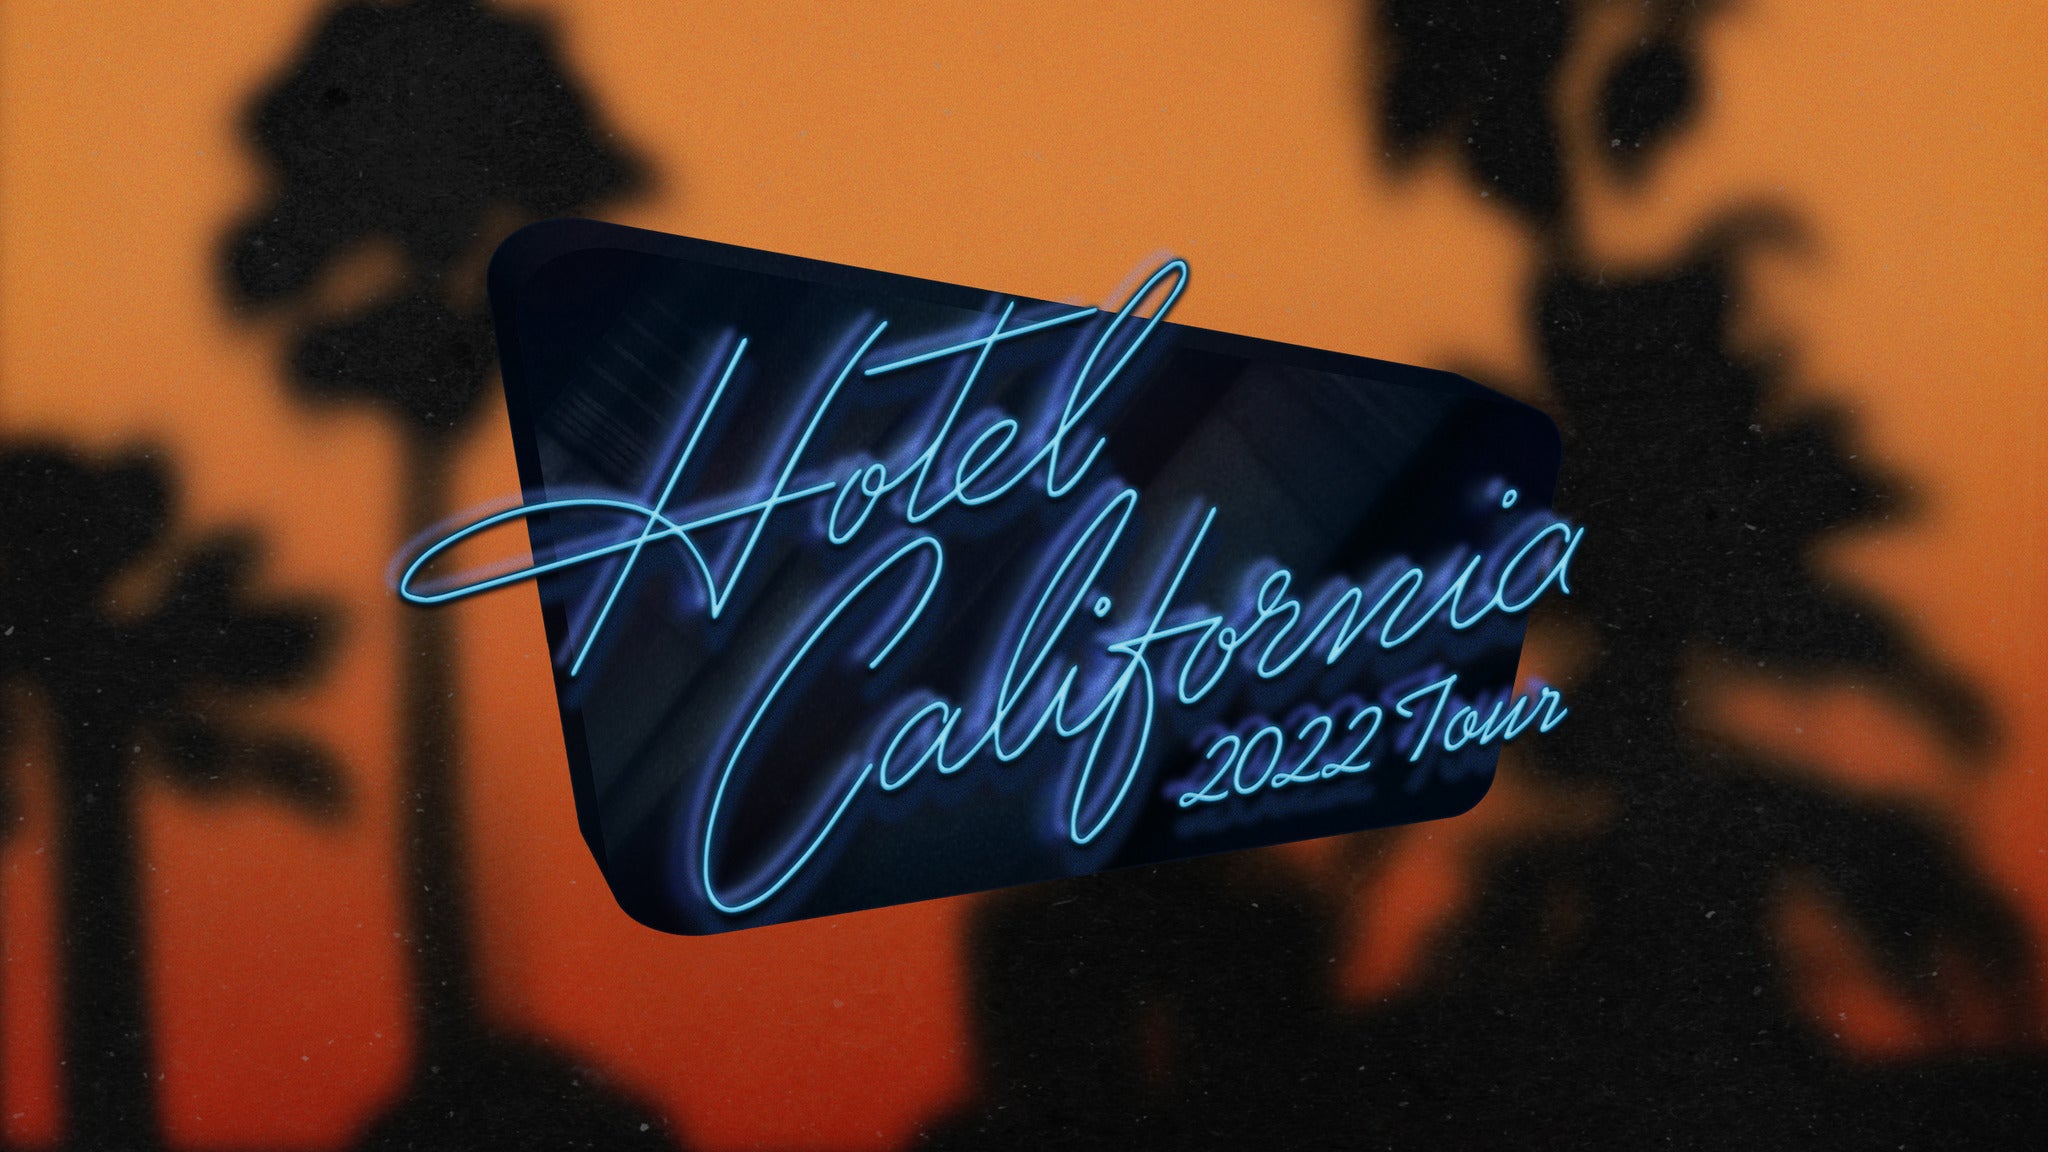 Eagles: Hotel California 2022 Tour presale password for early tickets in New Orleans